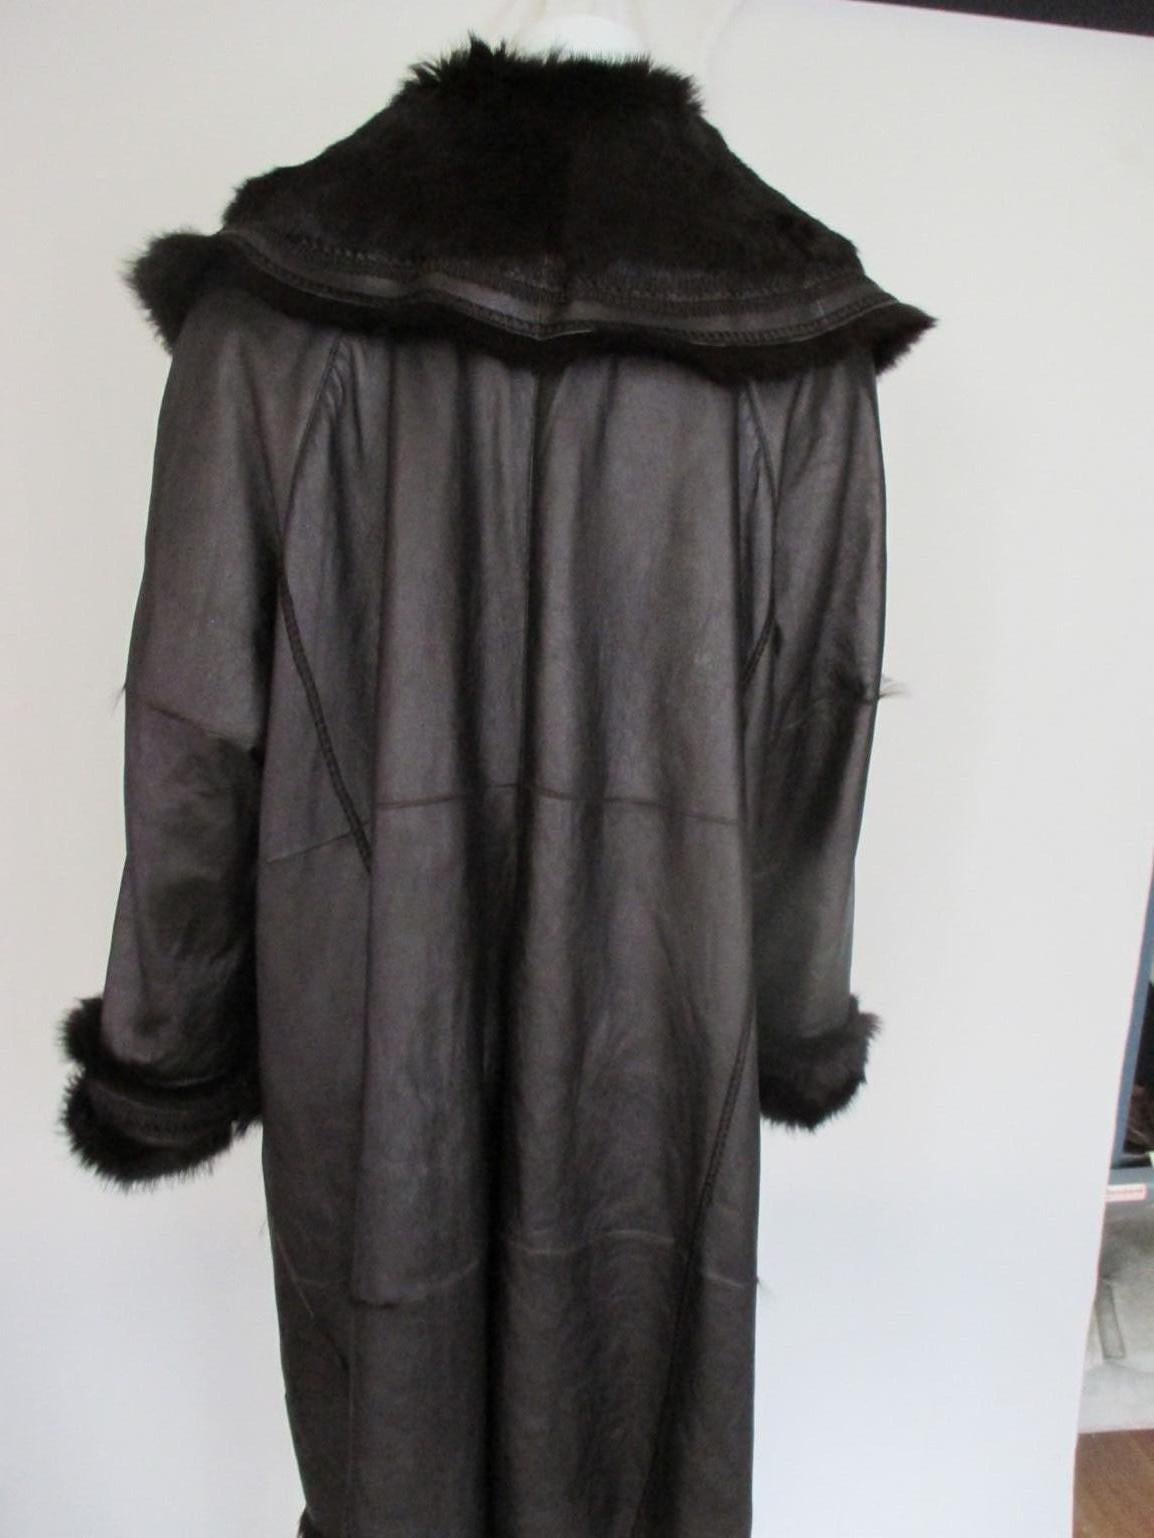 Light Weight Metallic Brown Leather Fur Swing Coat In Good Condition For Sale In Amsterdam, NL